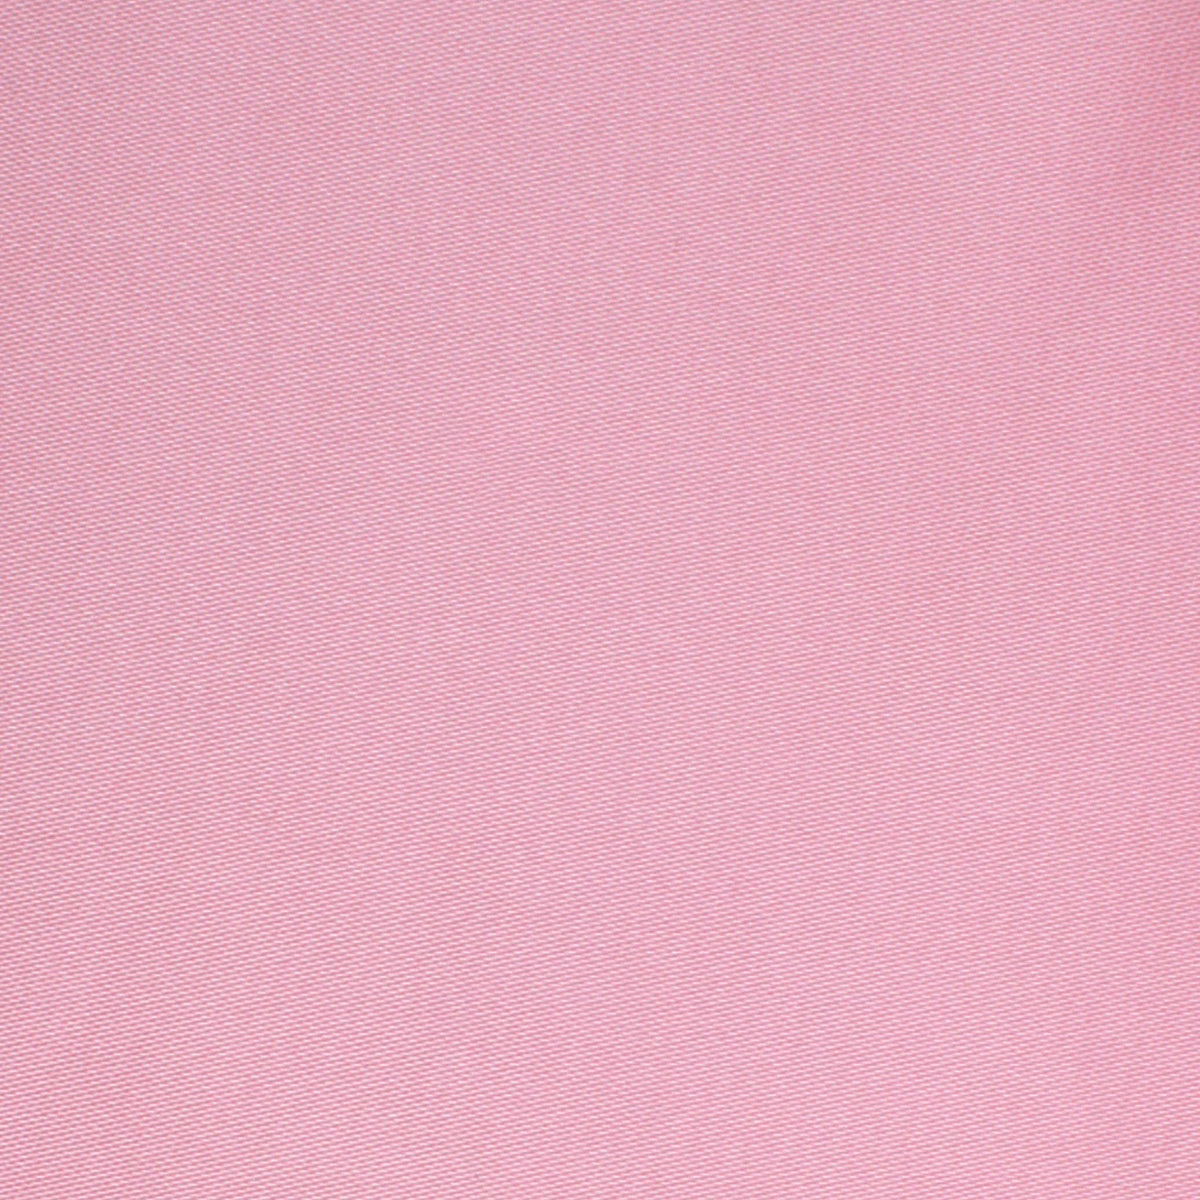 Rose Pink Satin Bow Tie Fabric